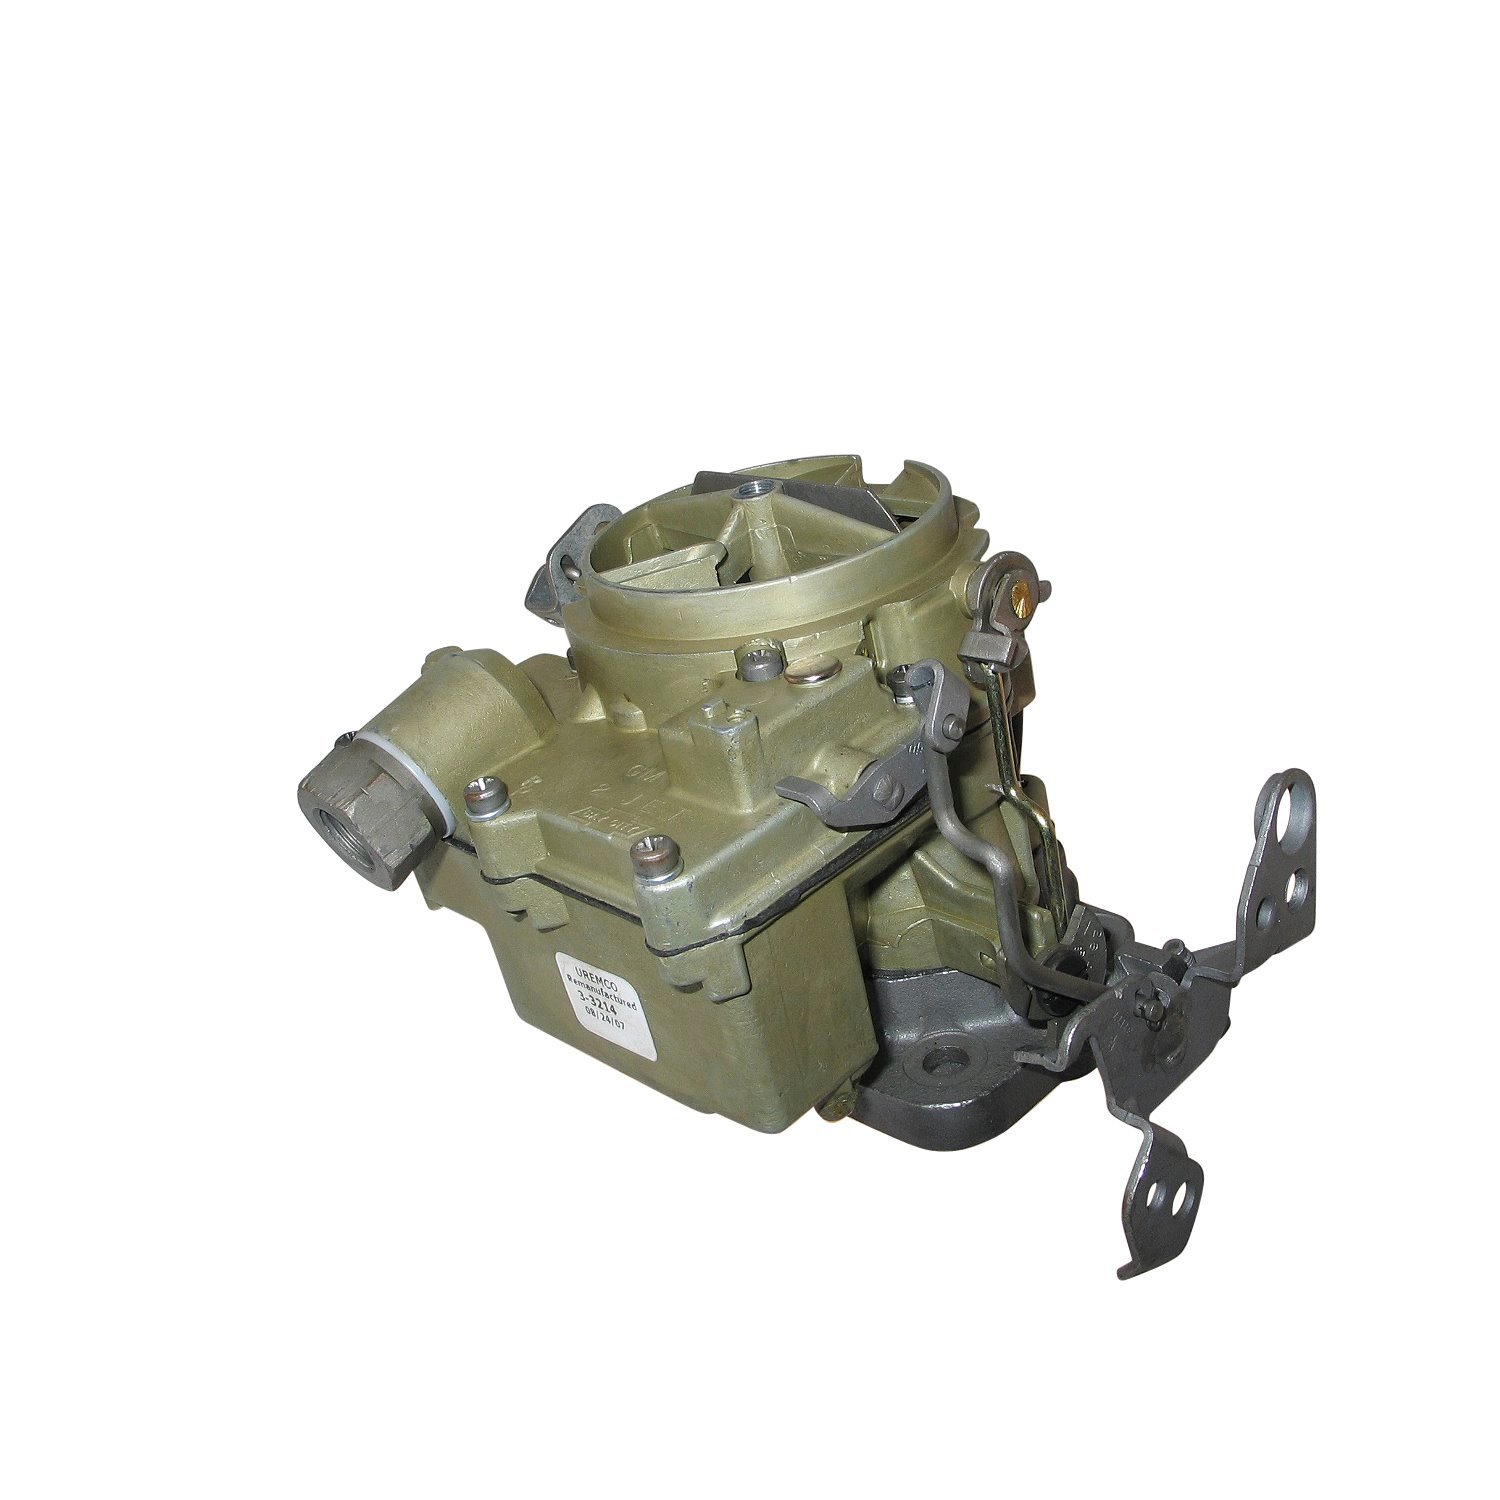 3-3214 Rochester Remanufactured Carburetor, 2GV-Style